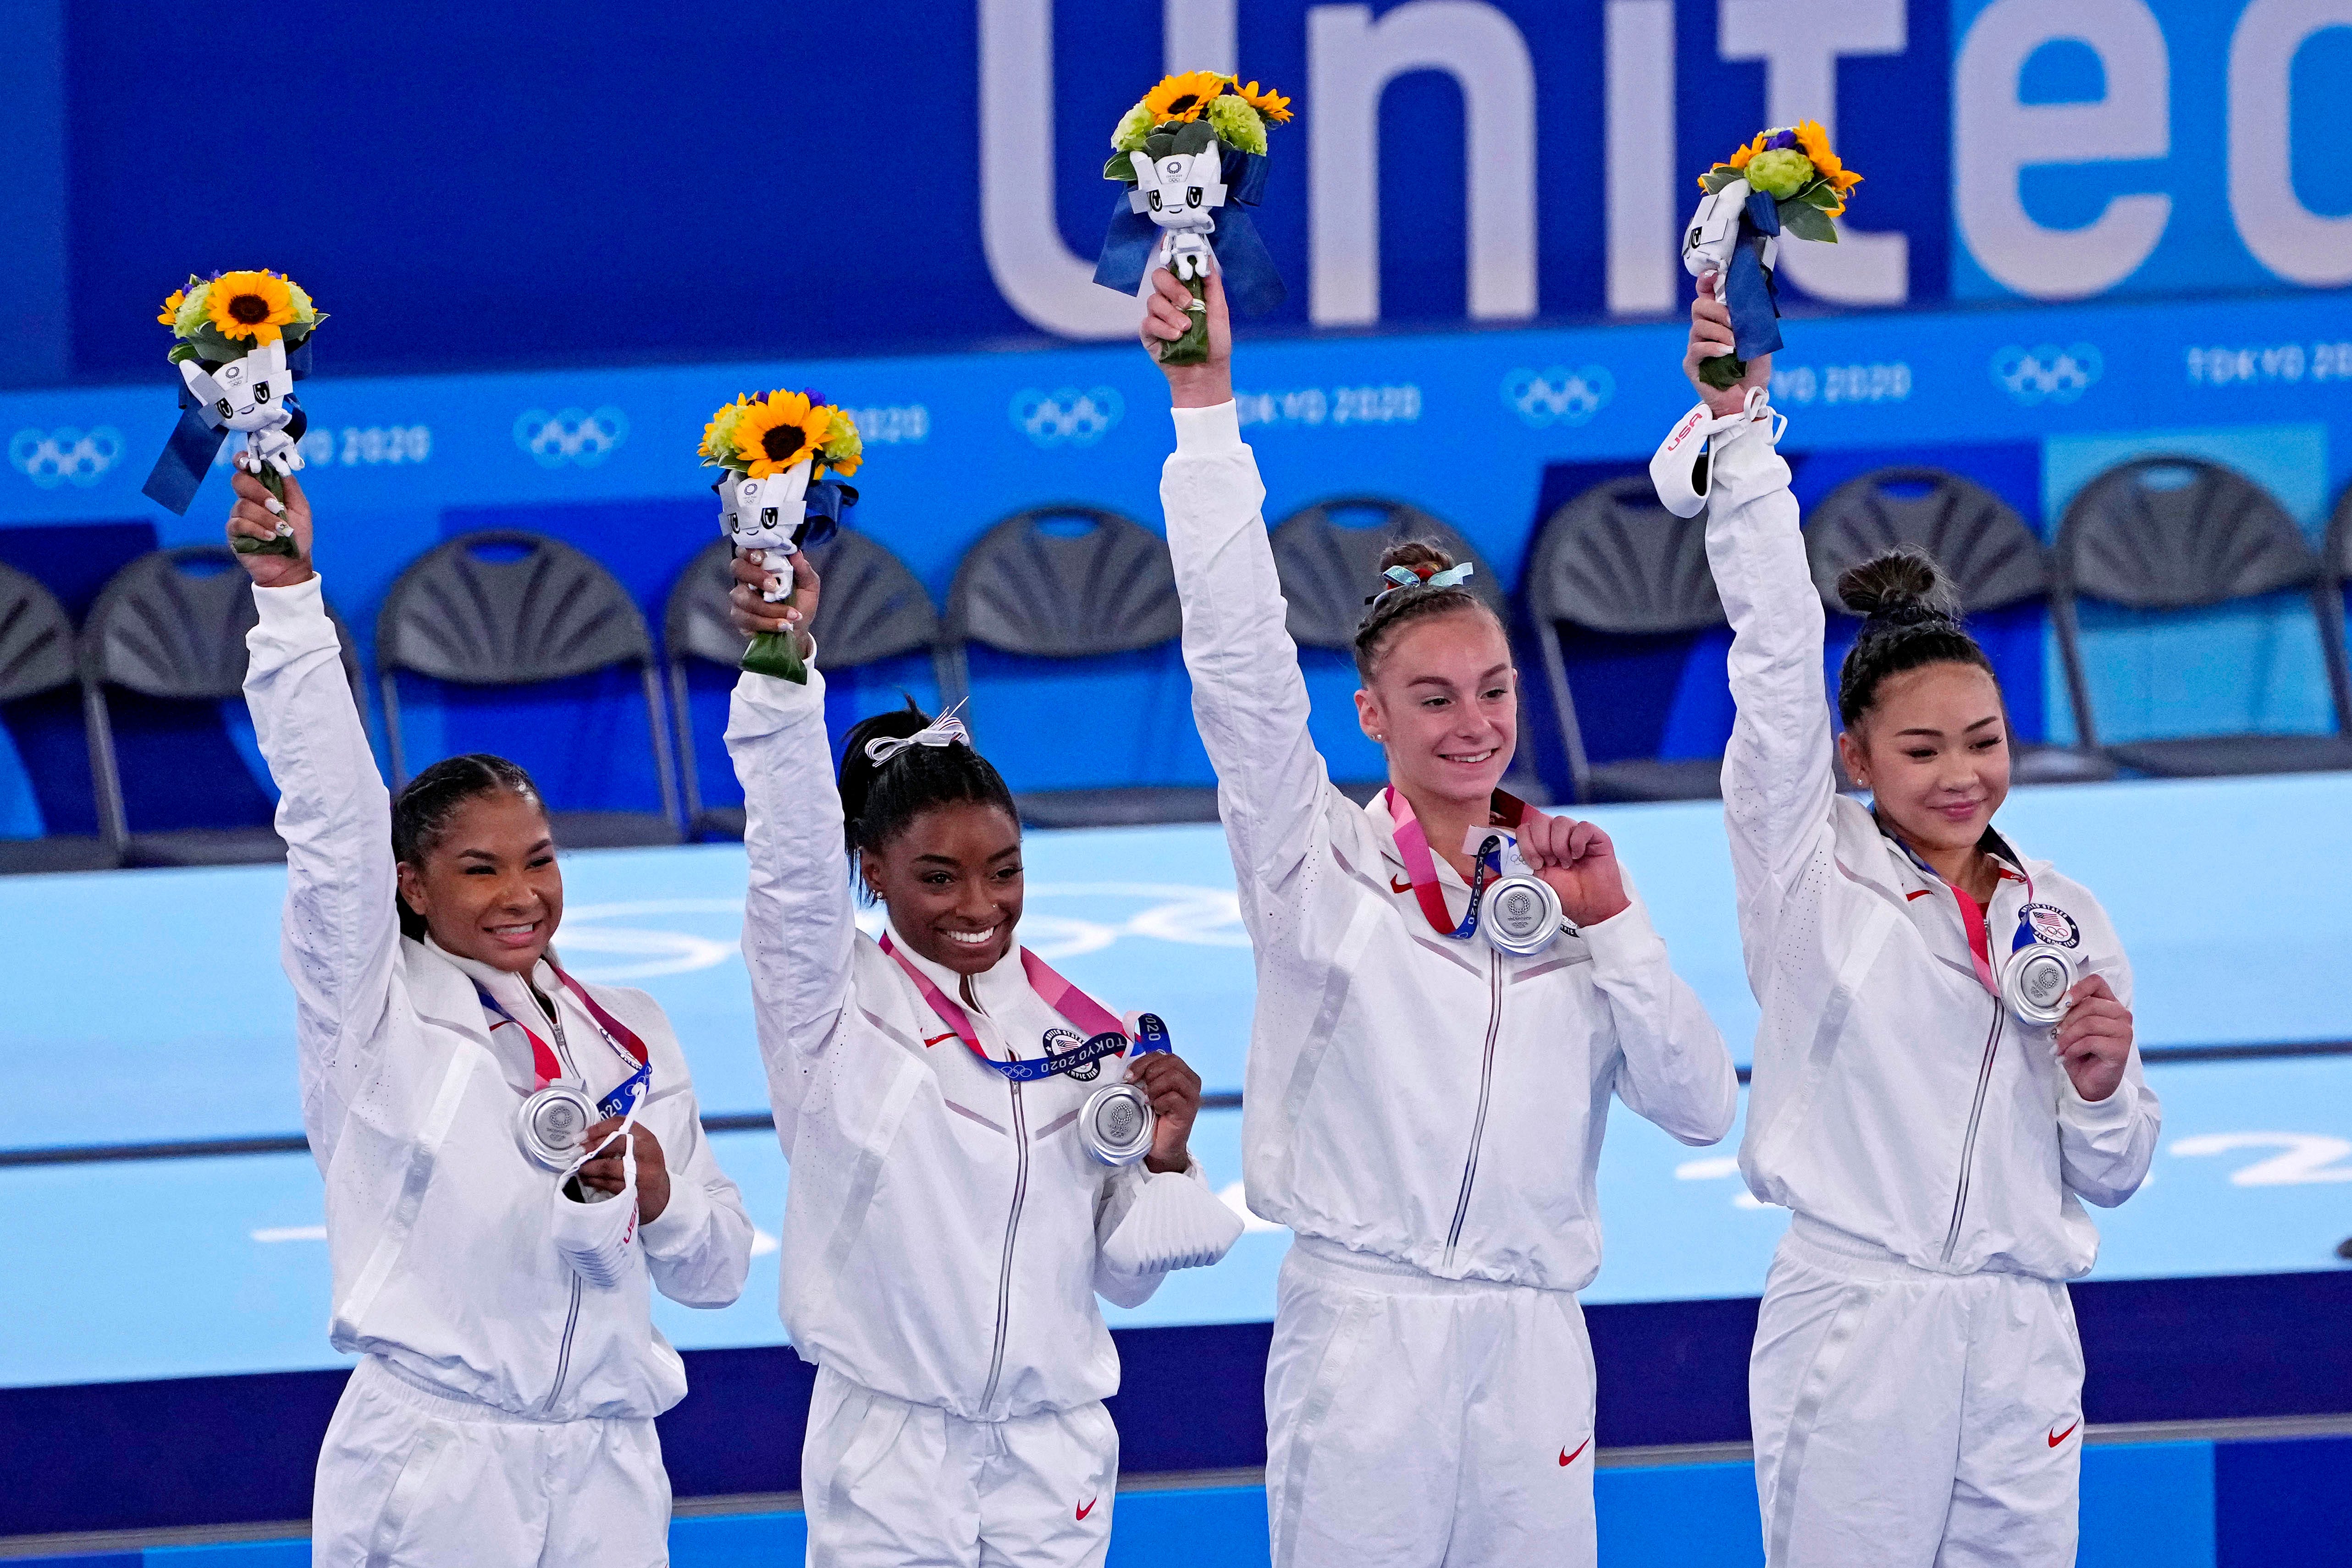 Us Women Win Olympics Gymnastics Silver After Biles Medical Issue